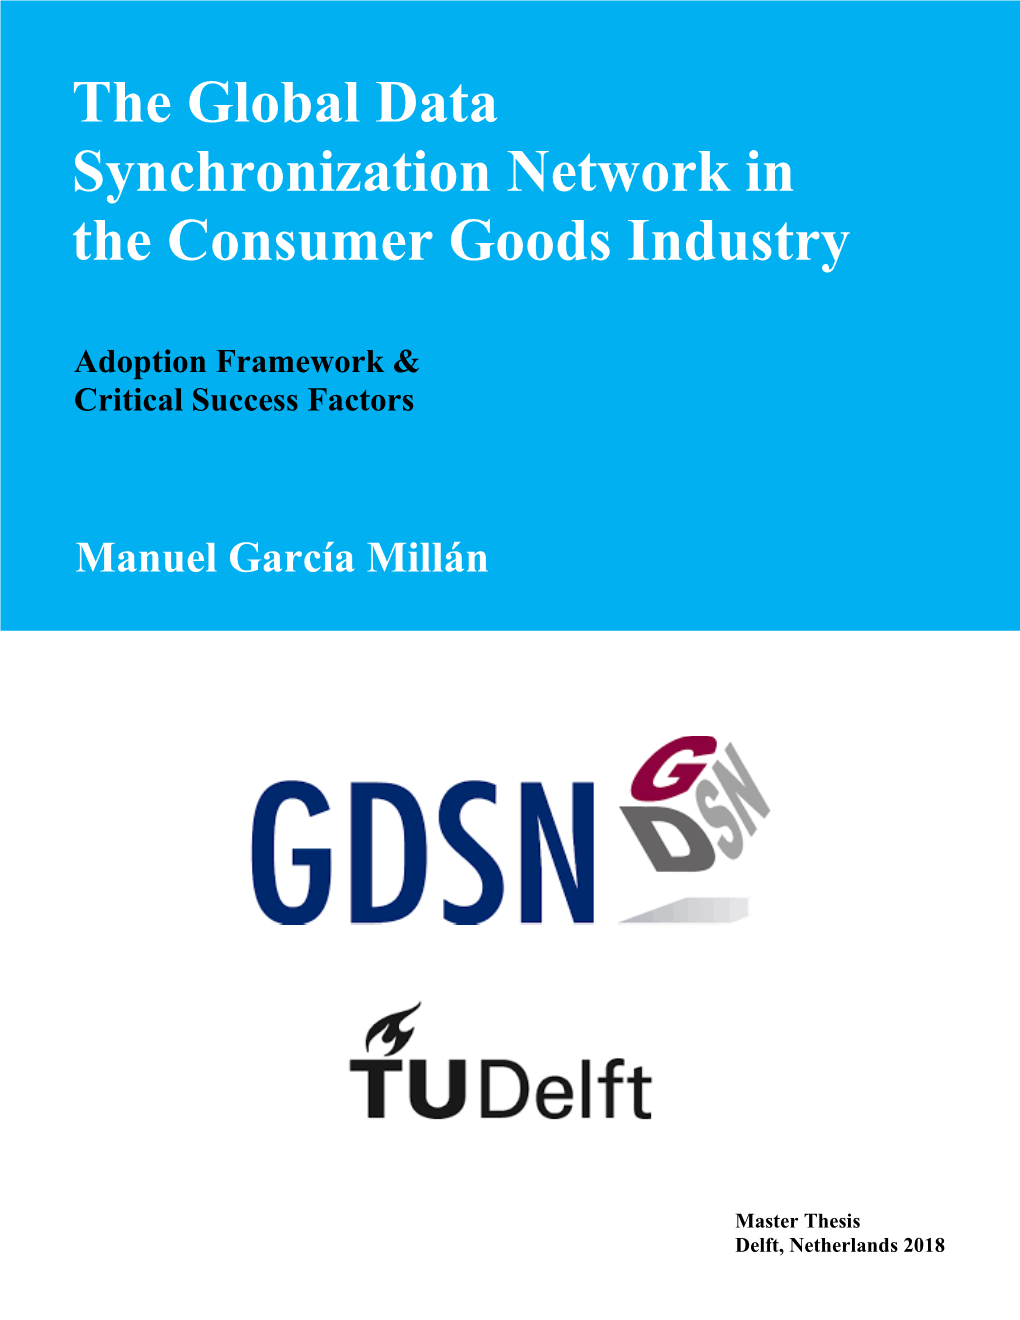 The Global Data Synchronization Network in the Consumer Goods Industry